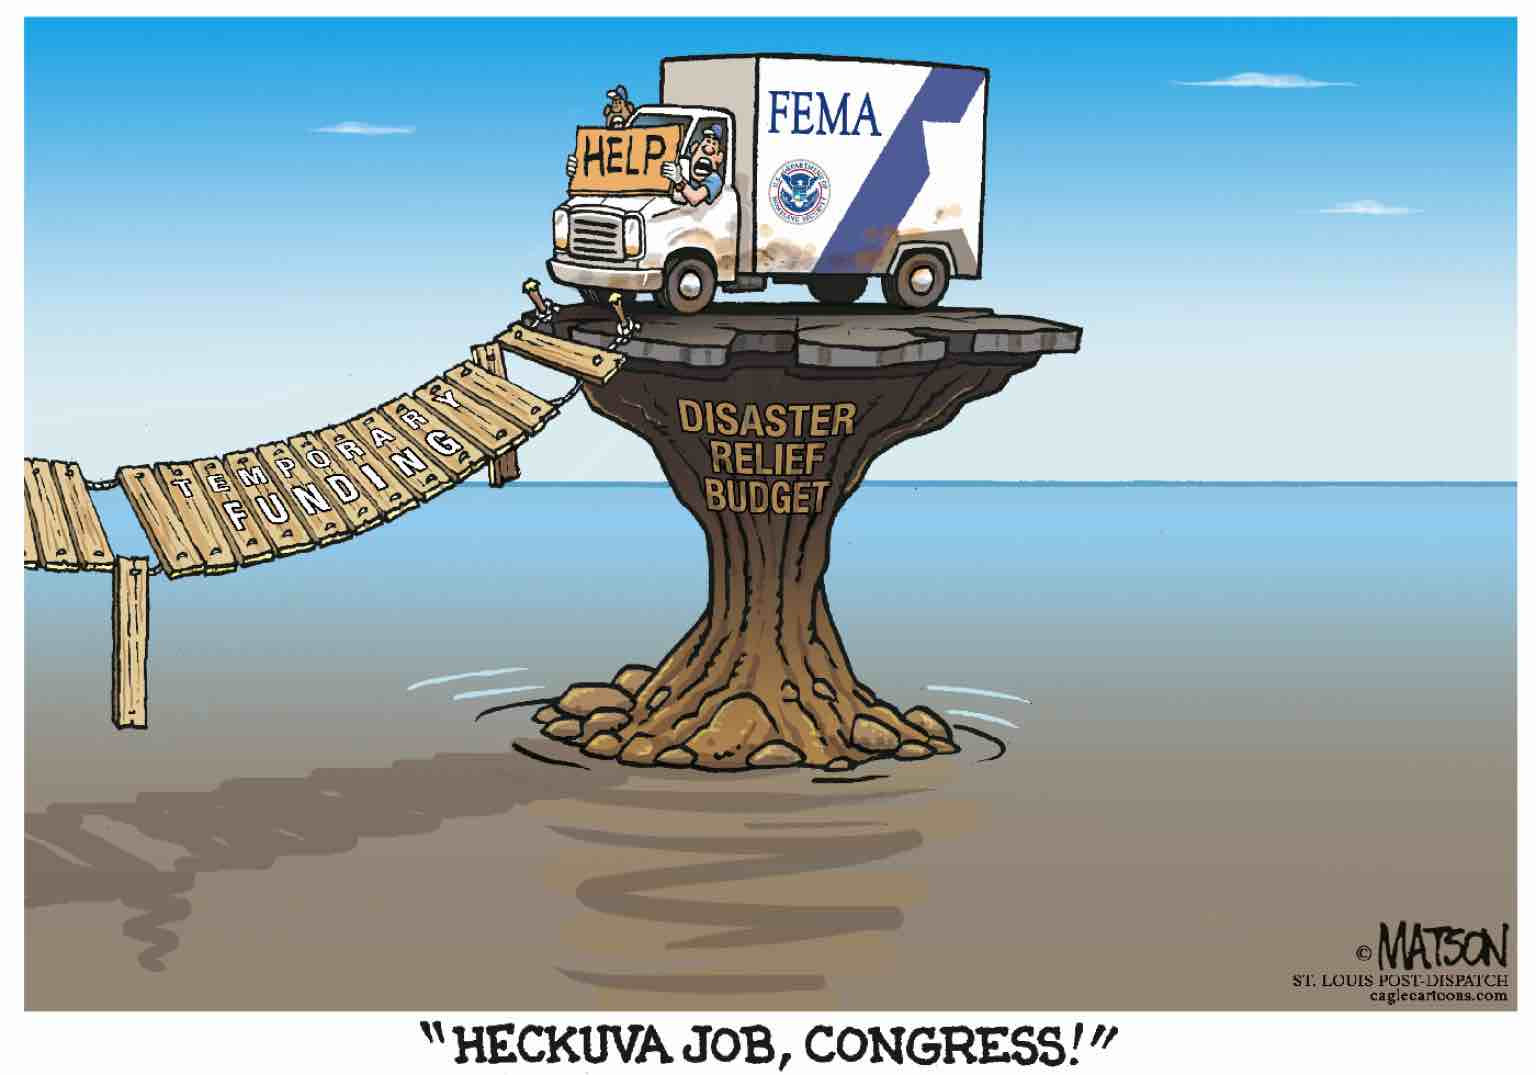 MAGA Republicans want more from FEMA while cutting its funding.